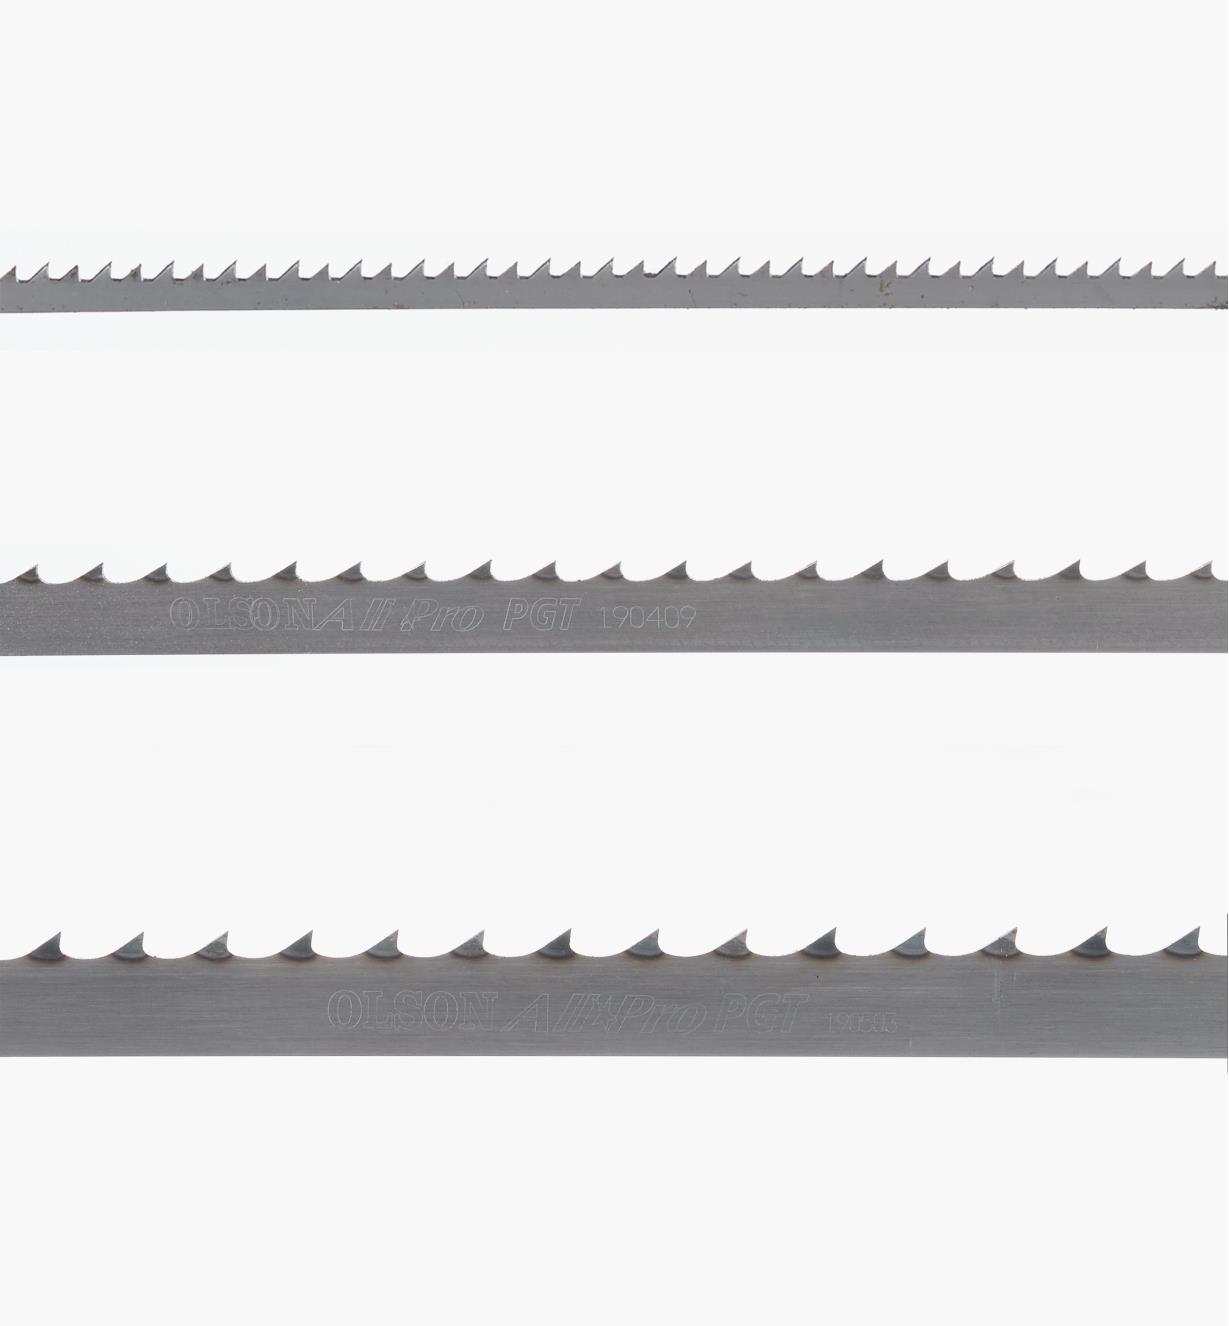 Close-up view showing the tooth patterns of the blade set for 10" Rikon bandsaws